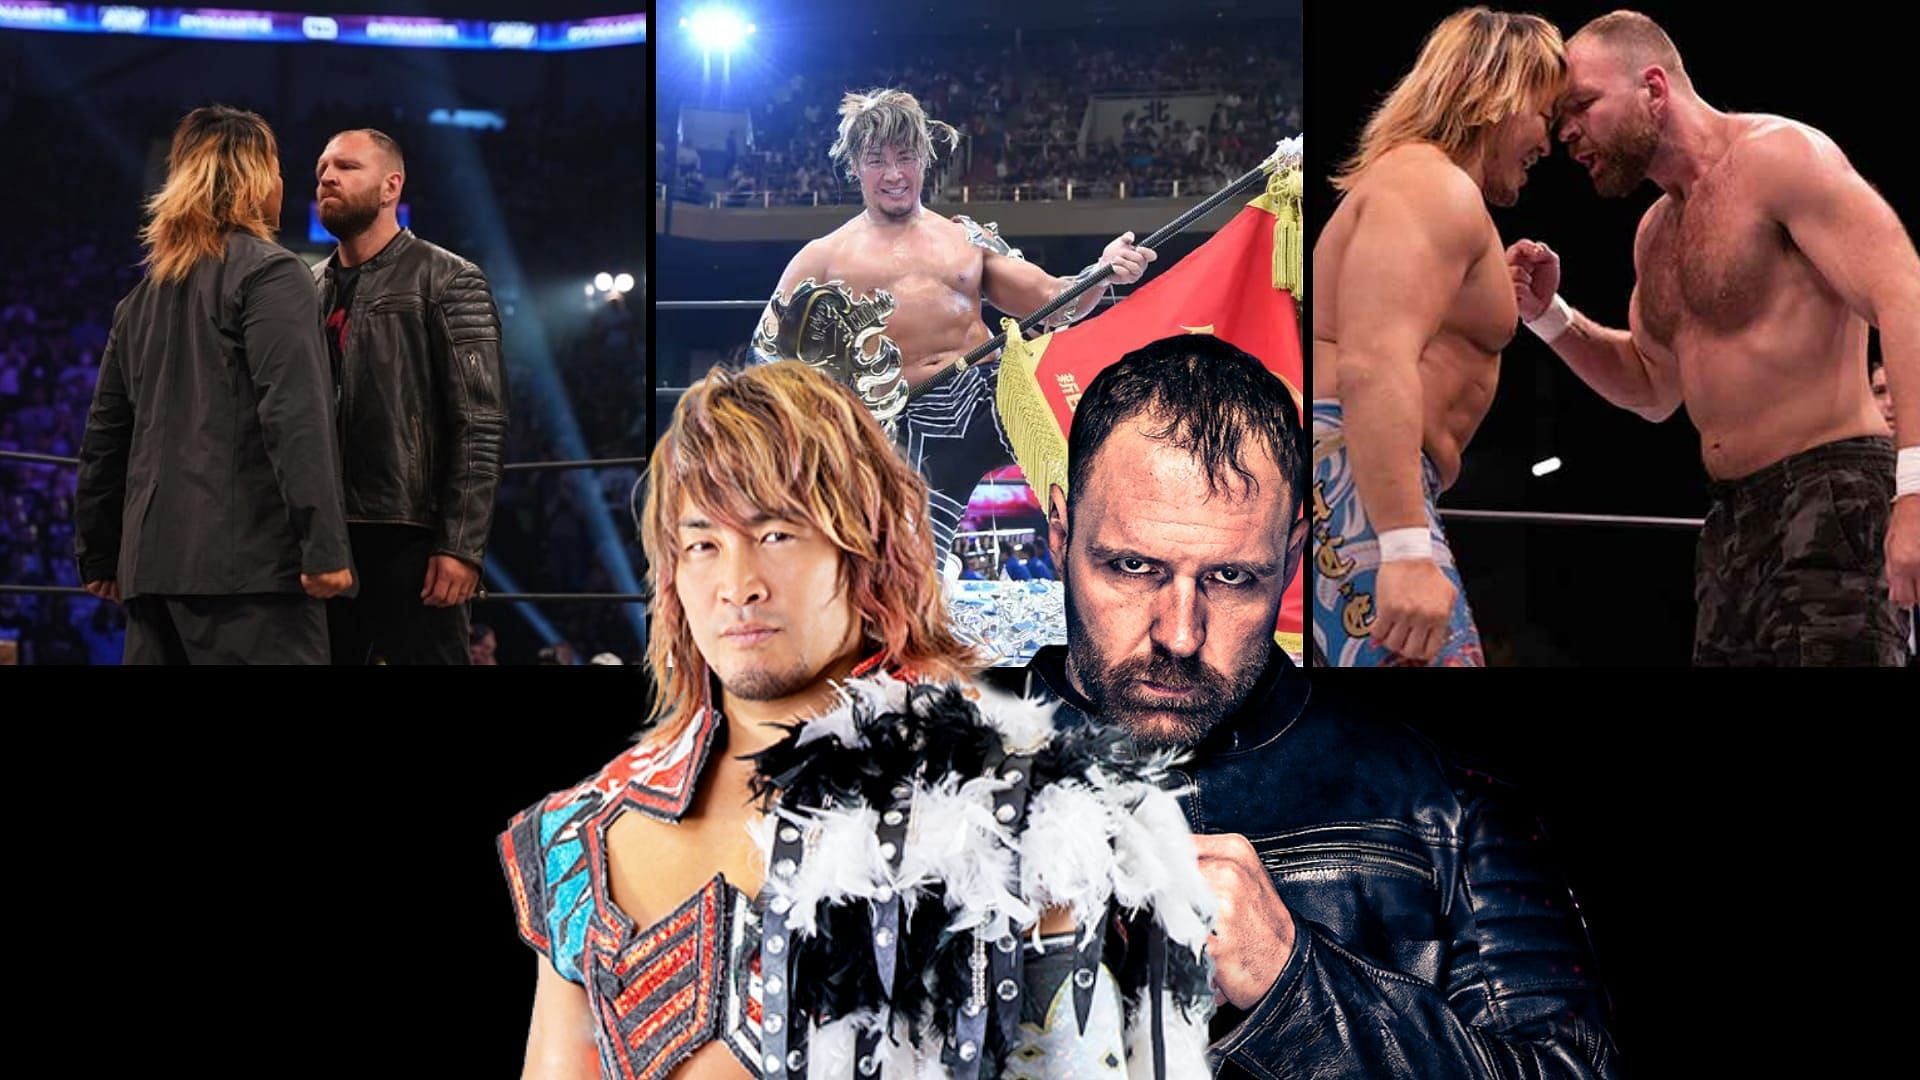 Jon Moxley and Hiroshi Tanahashi will square off to crown an Interim AEW Champion